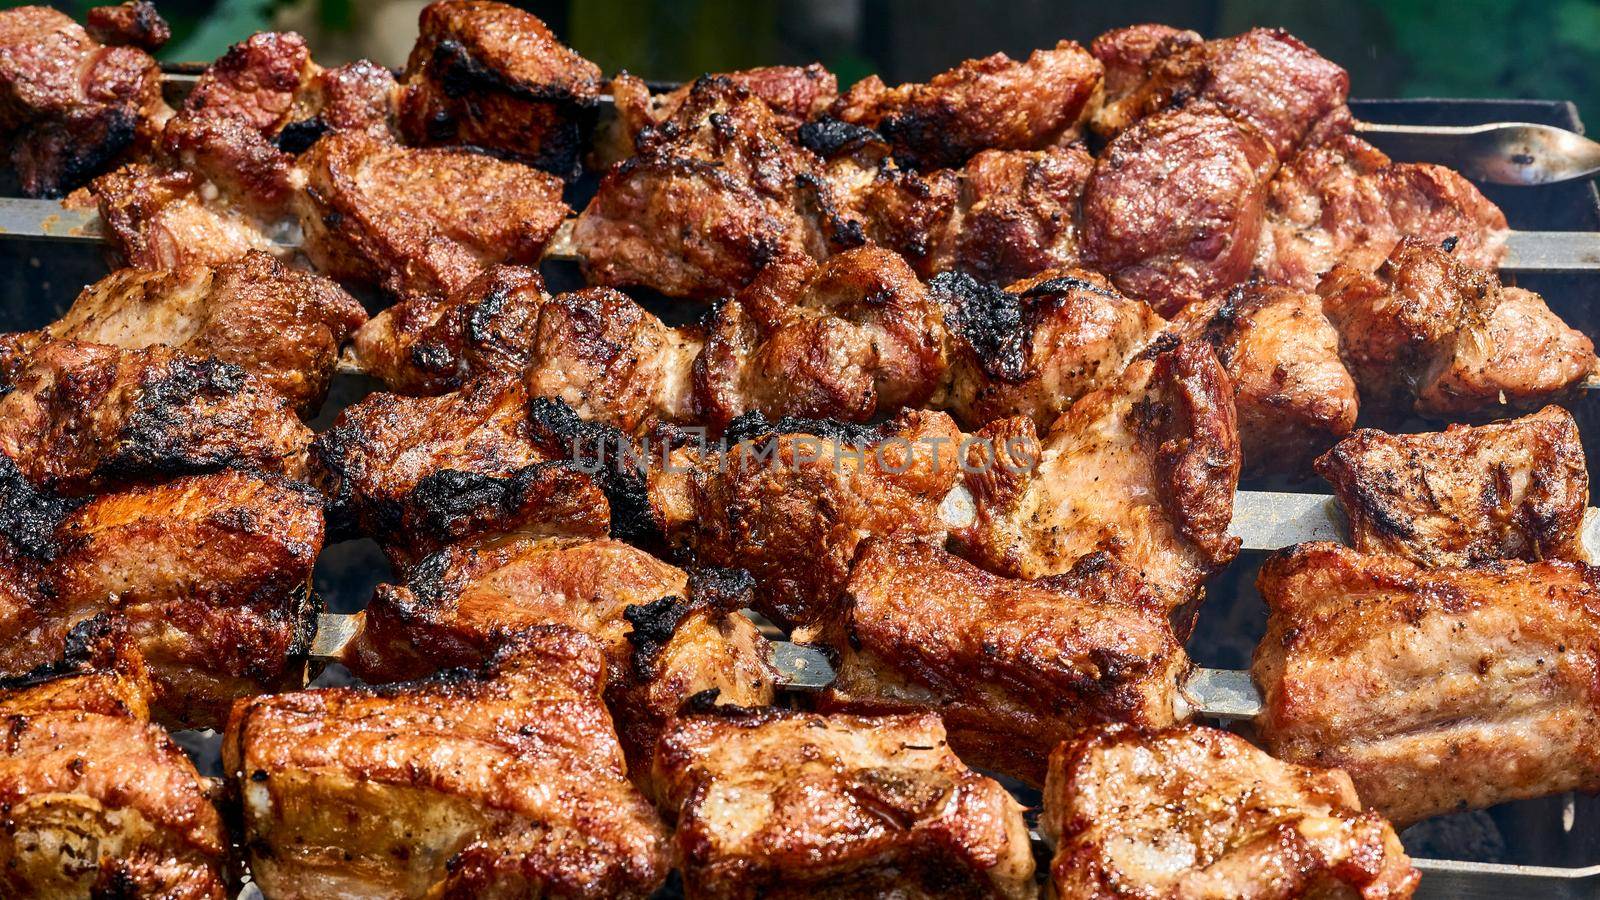 A meal or gathering at which meat, fish is cooked out of doors on a rack over an open fire or on a portable grill. Delicious piece of meat and potato fried over the fire at a picnic.